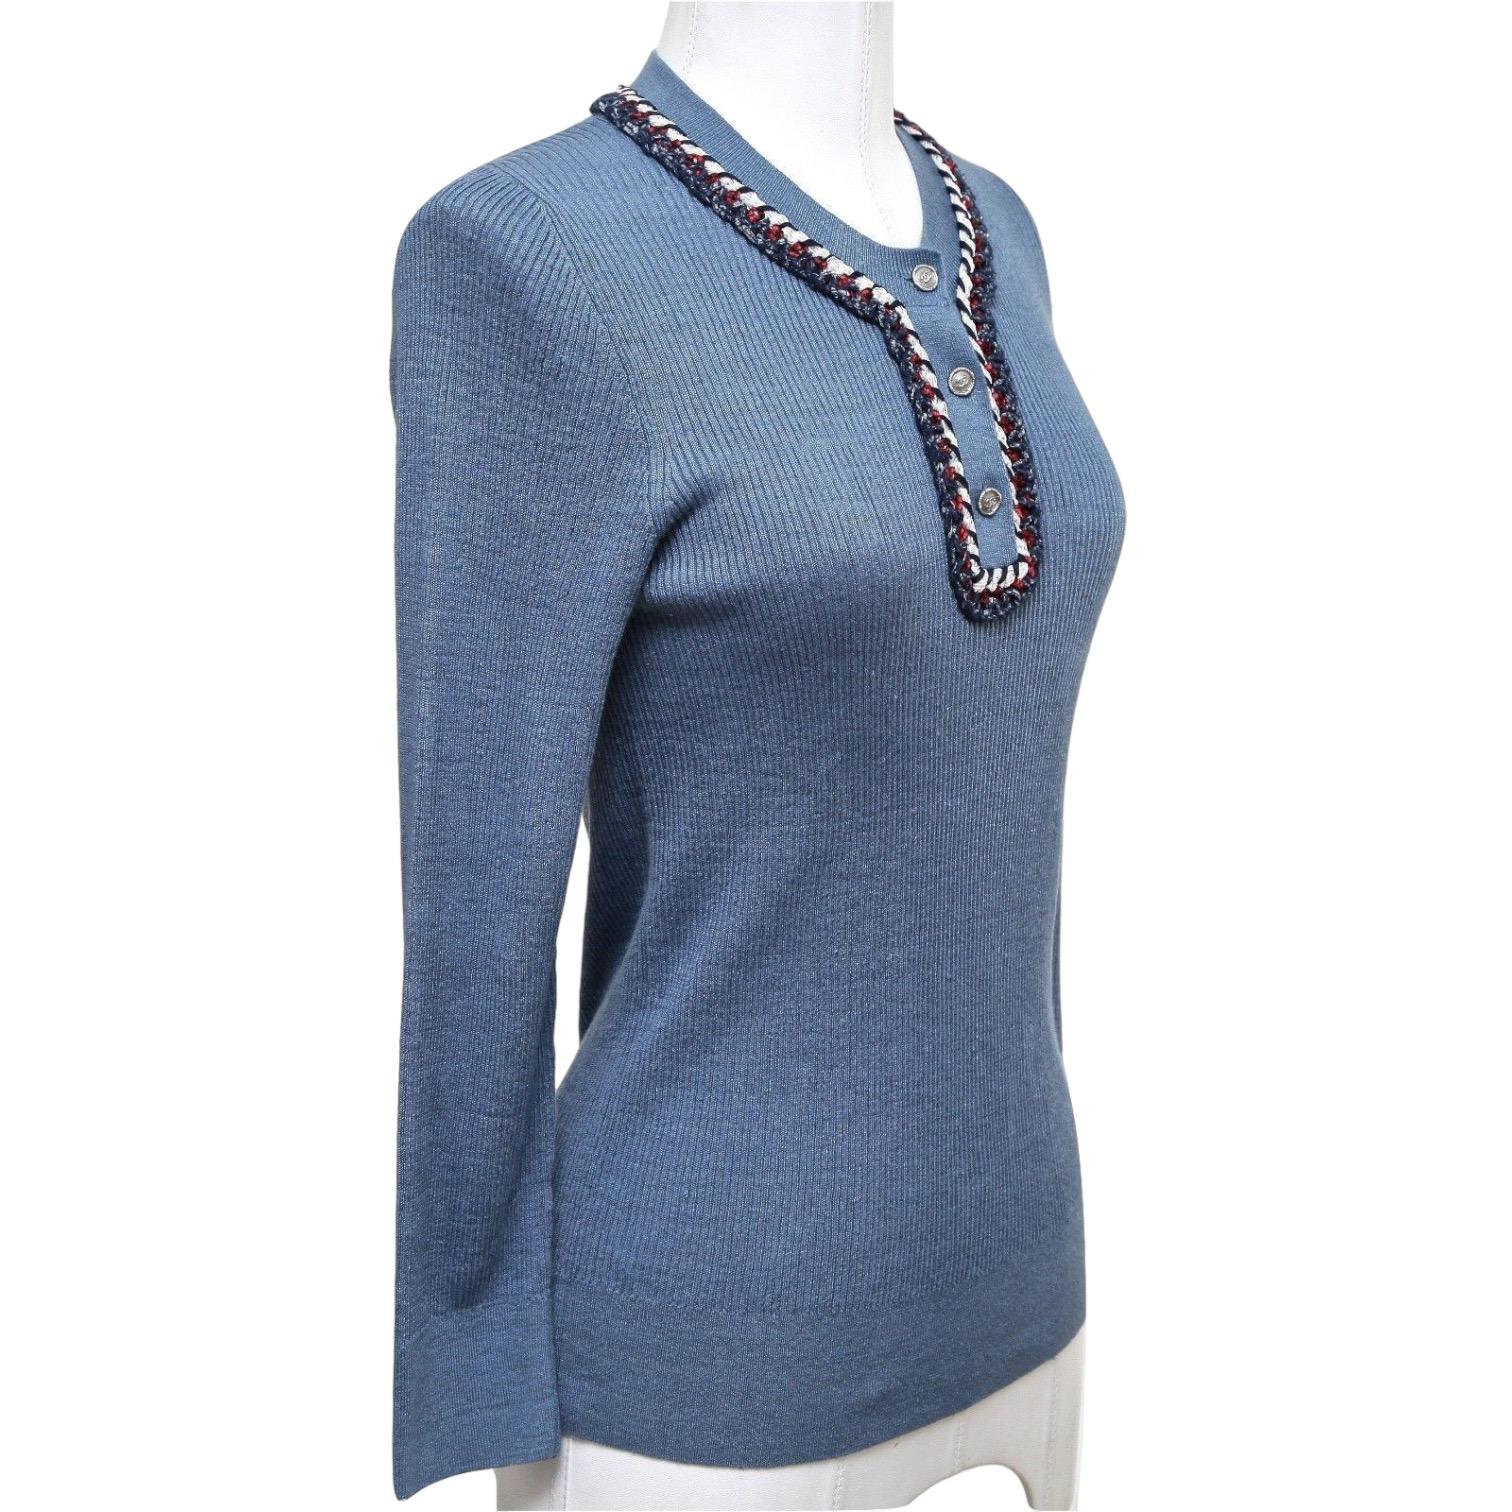 GUARANTEED AUTHENTIC CHANEL 13C CLASSIC HENLEY STYLE KNIT

Design:
- Long sleeve henley style ribbed knit in a rich blue.
- Red, white and blue fringe detail.
- 3 silver-tone hardware CC logo buttons.
- Beautiful!

Size: 40

Material: 78% Linen, 22%